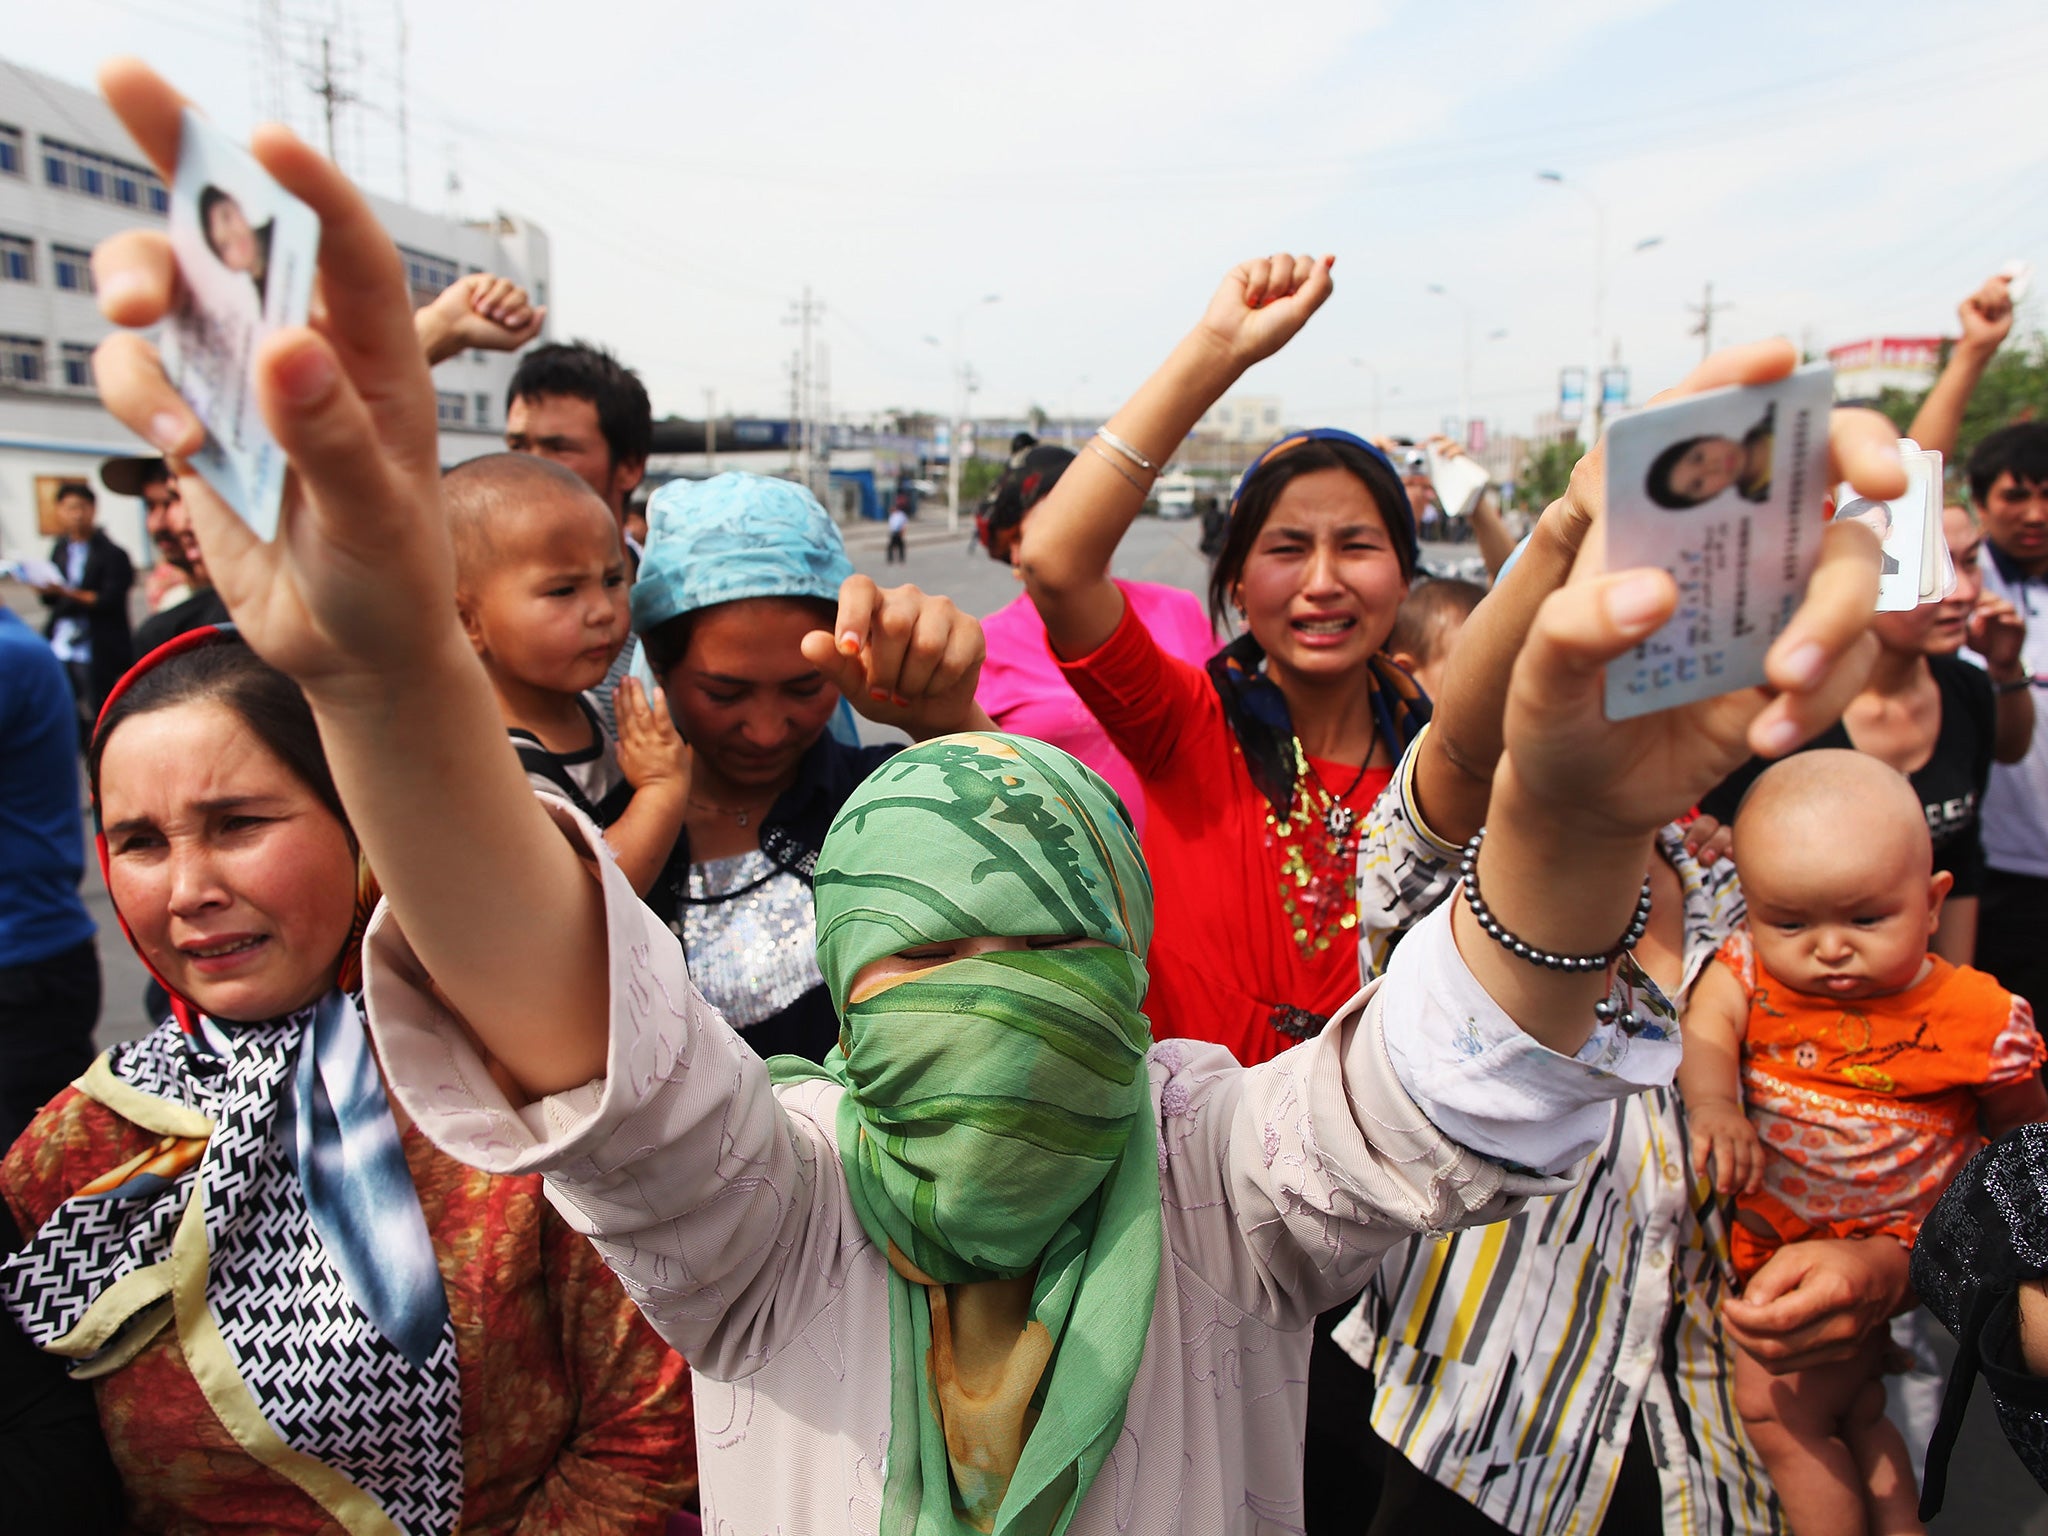 Uighur women protest against the Chinese government in Urumqi, the capital of Xinjiang Uighur autonomous region